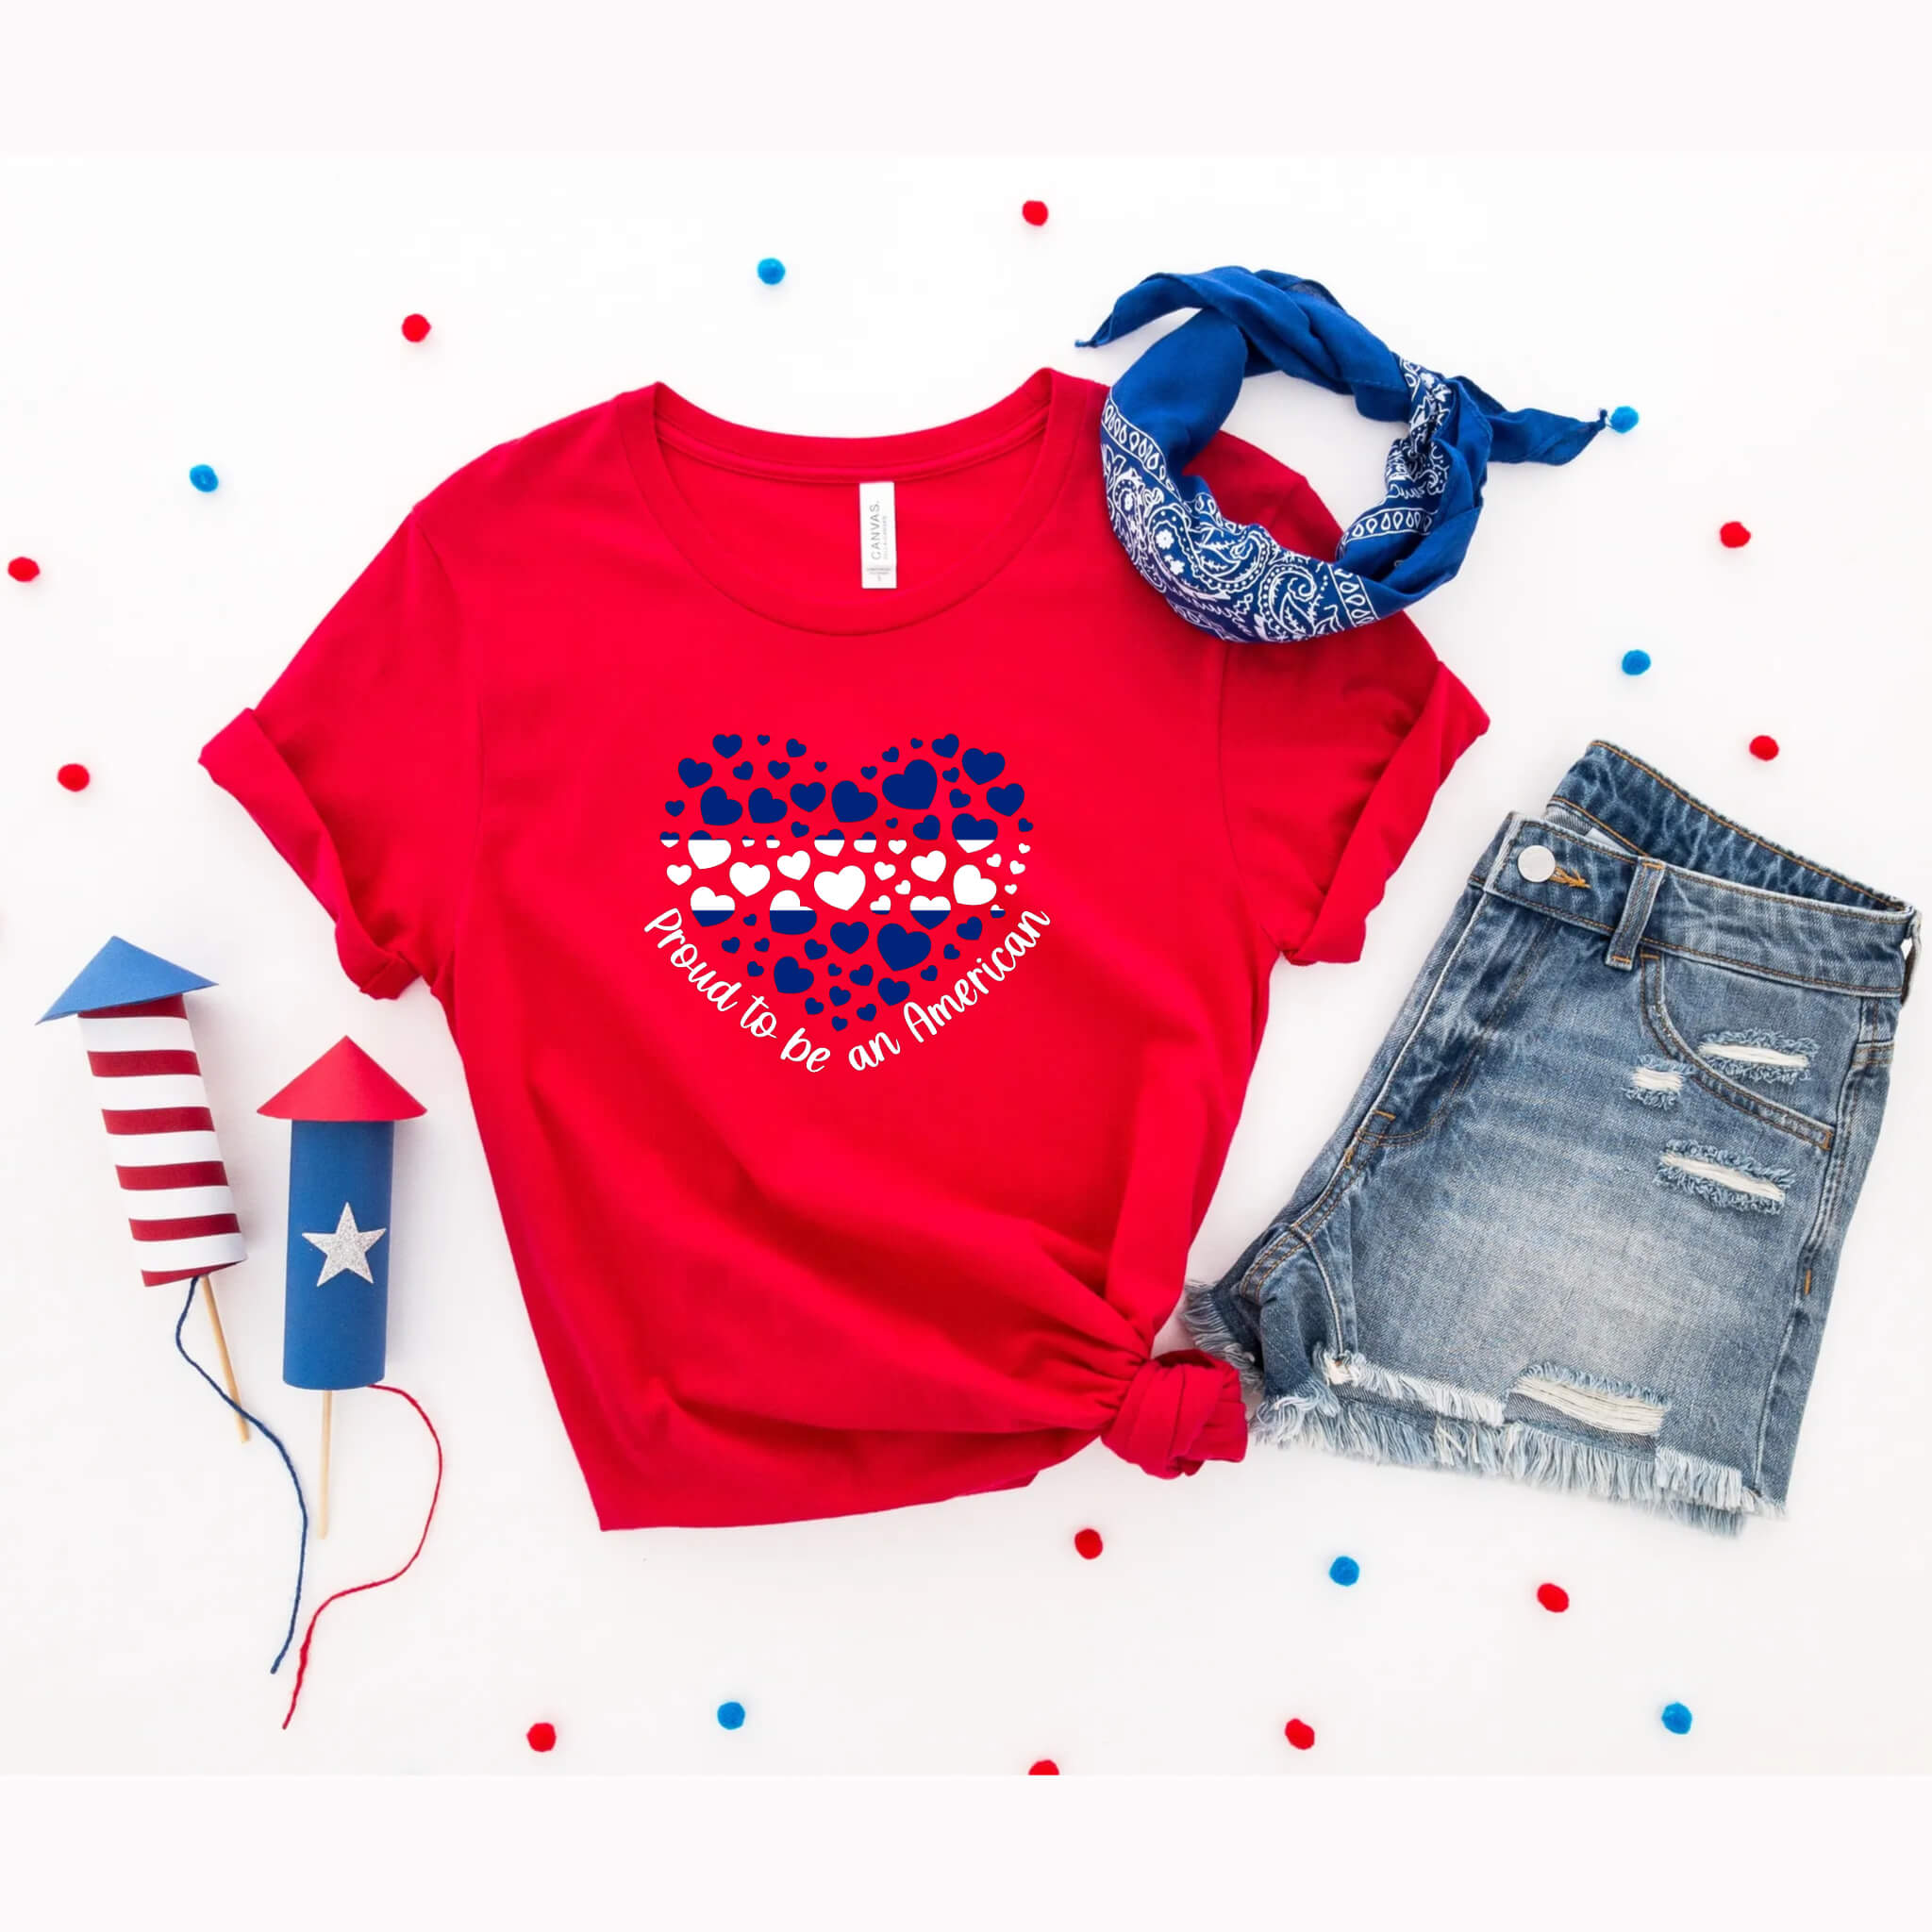 4th of July - Proud To Be American Patriotic Women’s Graphic Print T-Shirt / Tank Top